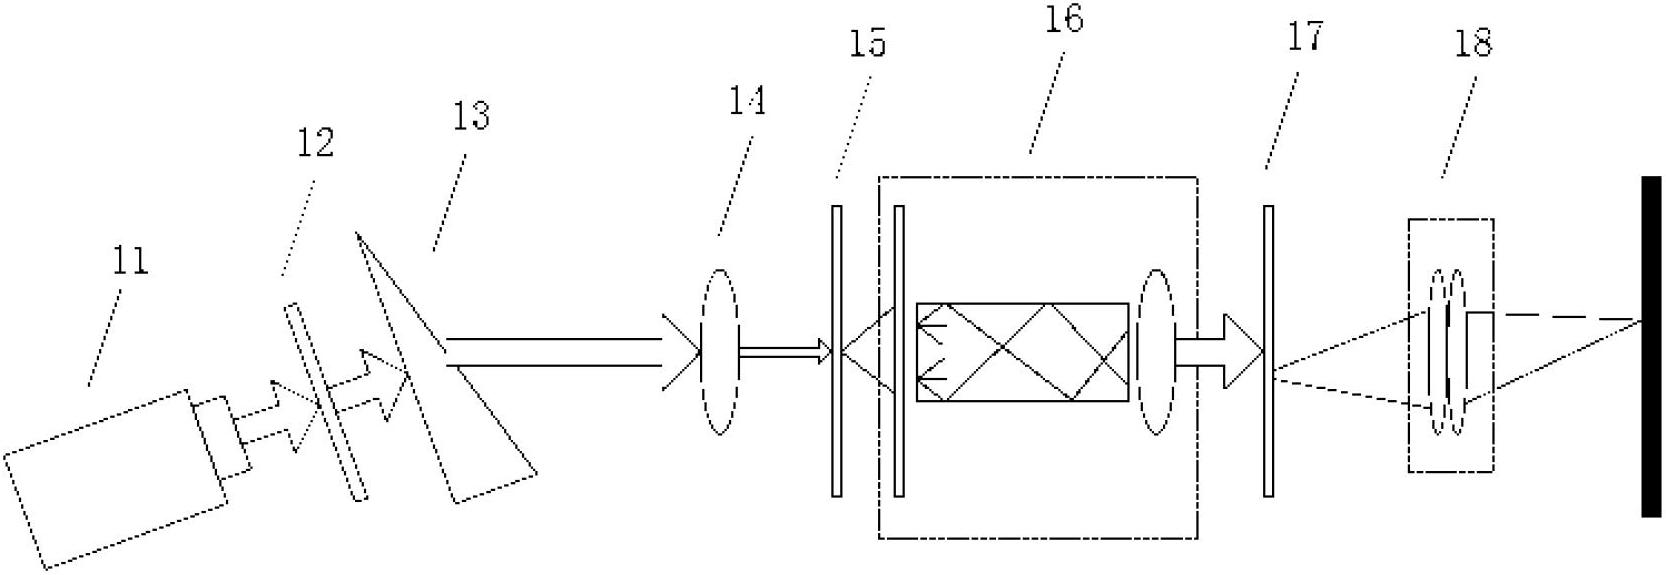 Laser display system and method based on electro-optical deflection speckle suppression